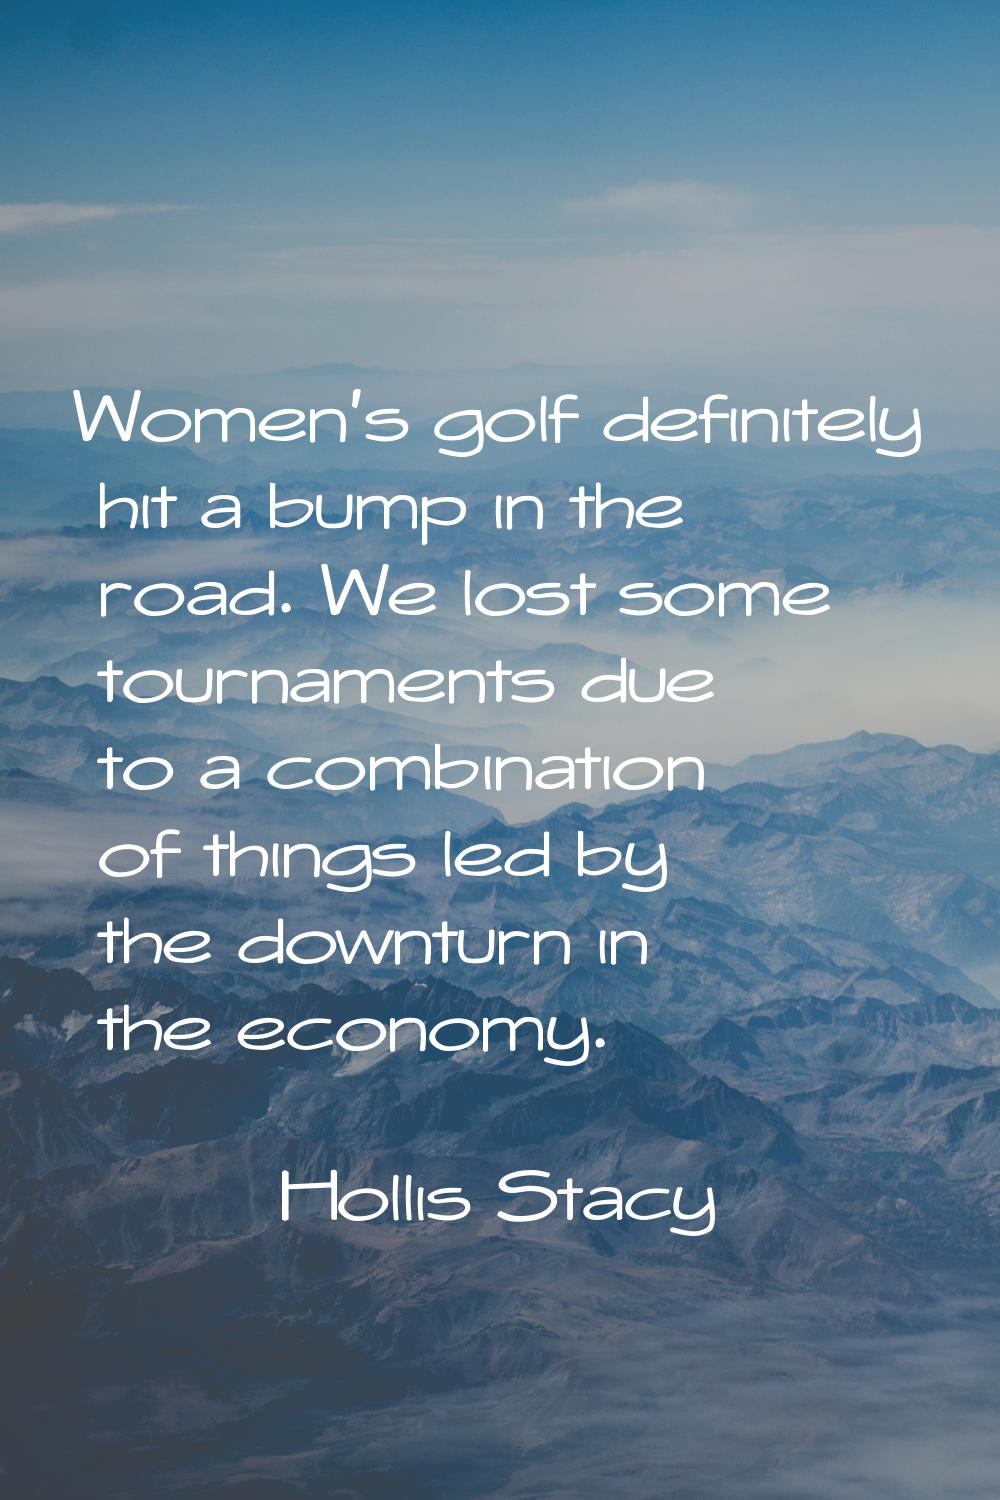 Women's golf definitely hit a bump in the road. We lost some tournaments due to a combination of th